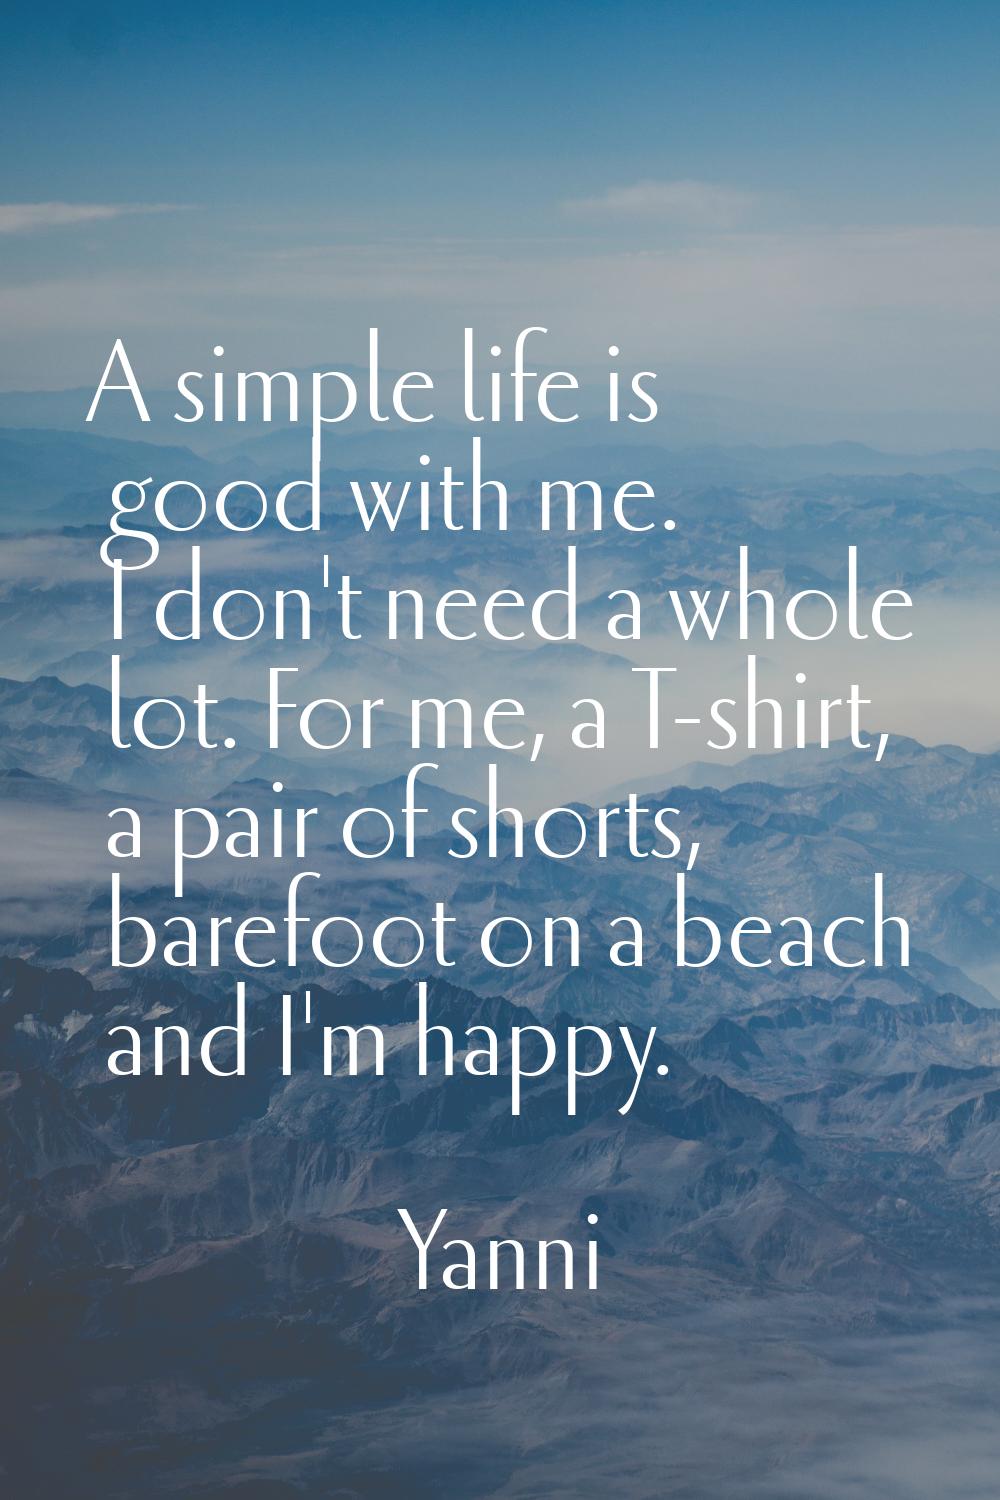 A simple life is good with me. I don't need a whole lot. For me, a T-shirt, a pair of shorts, baref